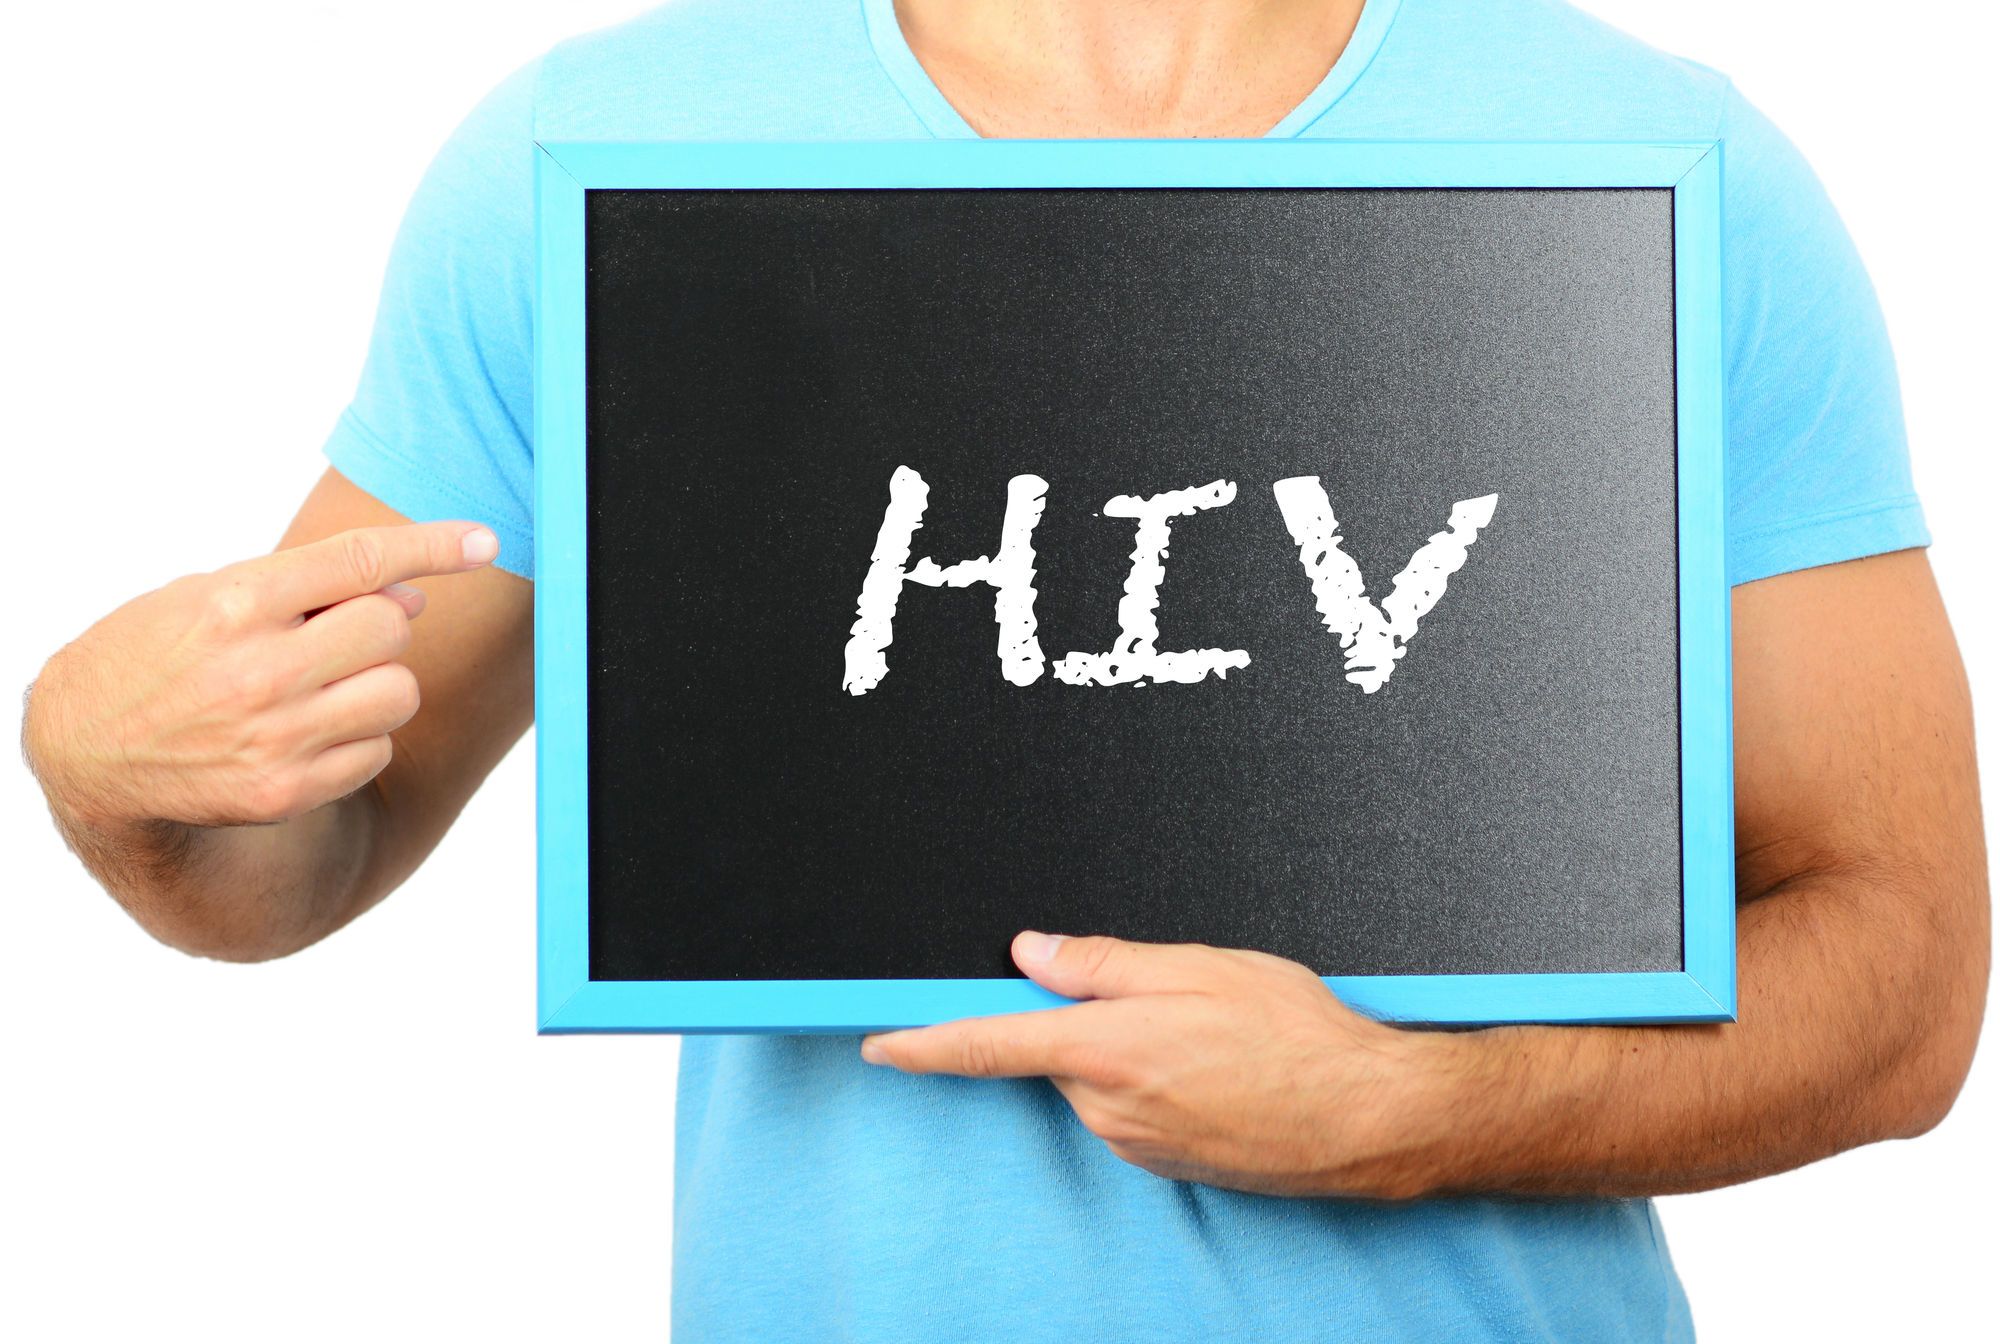 Tenofovir may help patients with HIV.